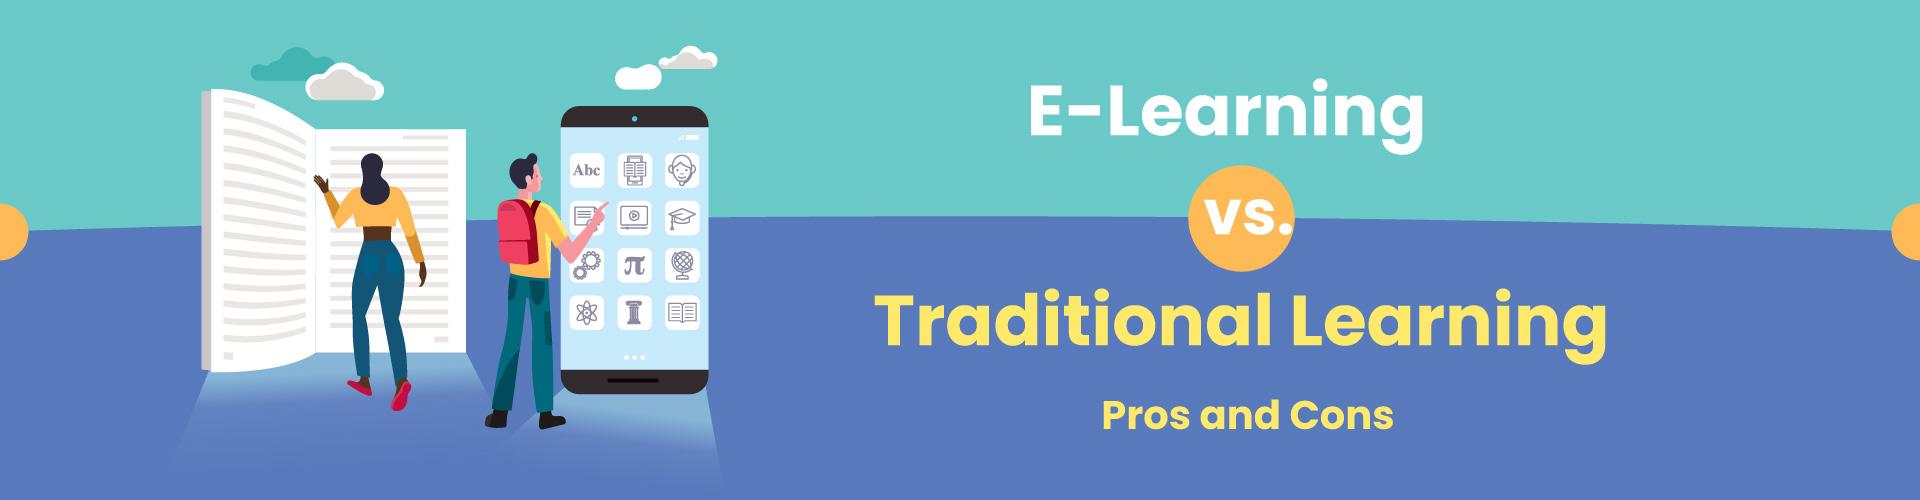 E-Learning vs. Traditional Learning: Pros and Cons